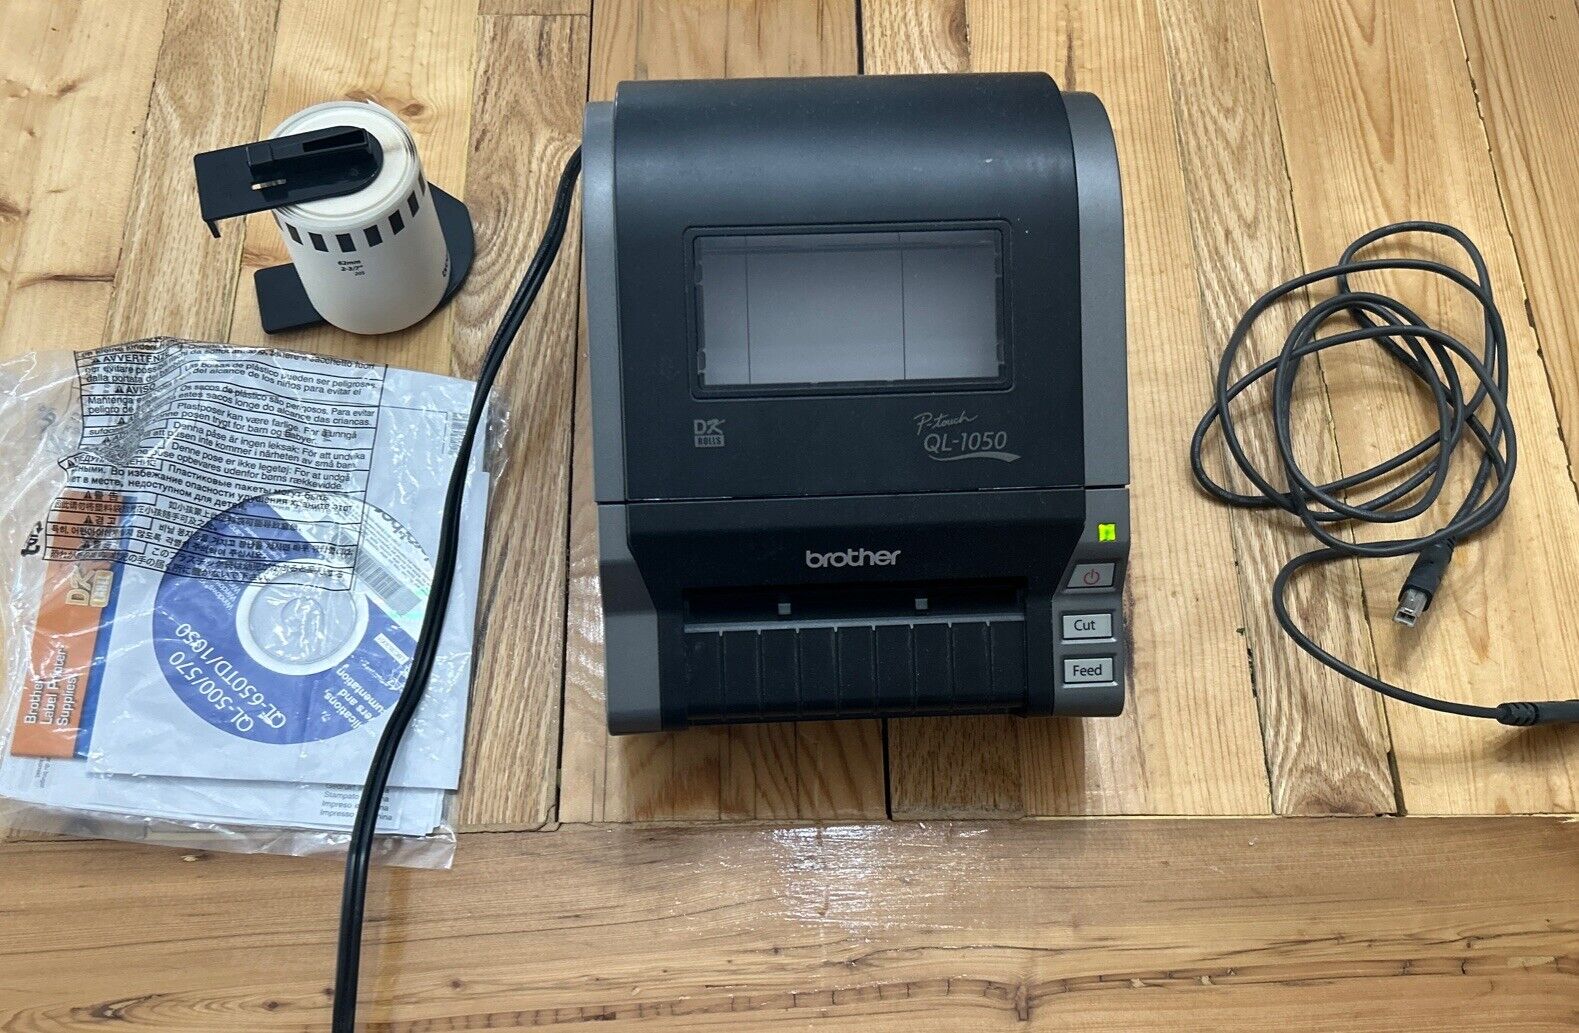 Brother QL-1050 Label Printer Wide Format PC Label Printer Tested And Works